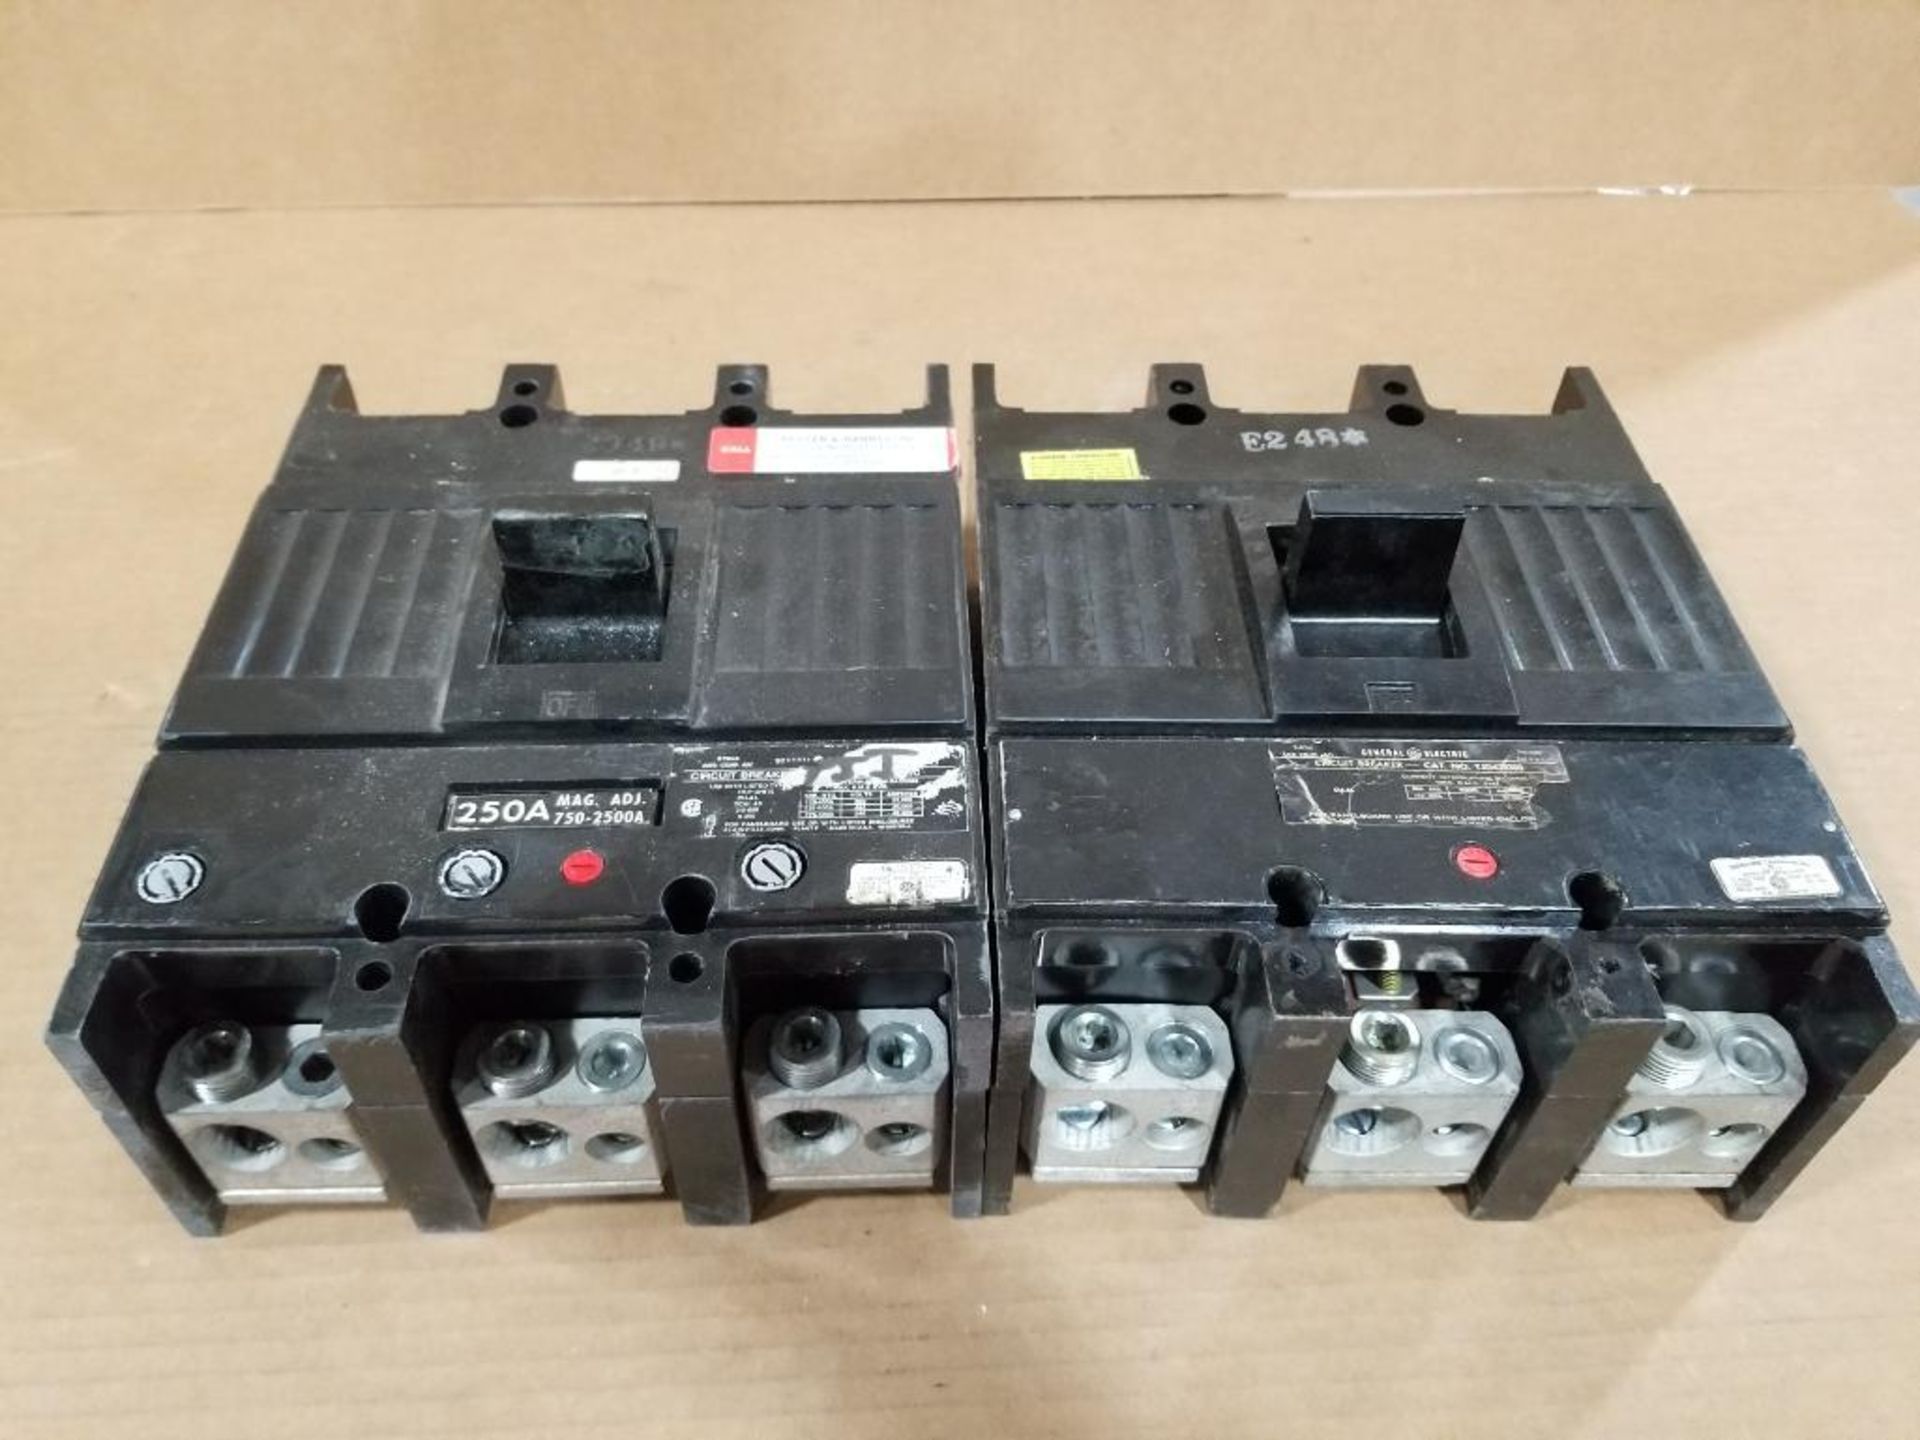 Qty 2 - GE Molded case circuit breakers.